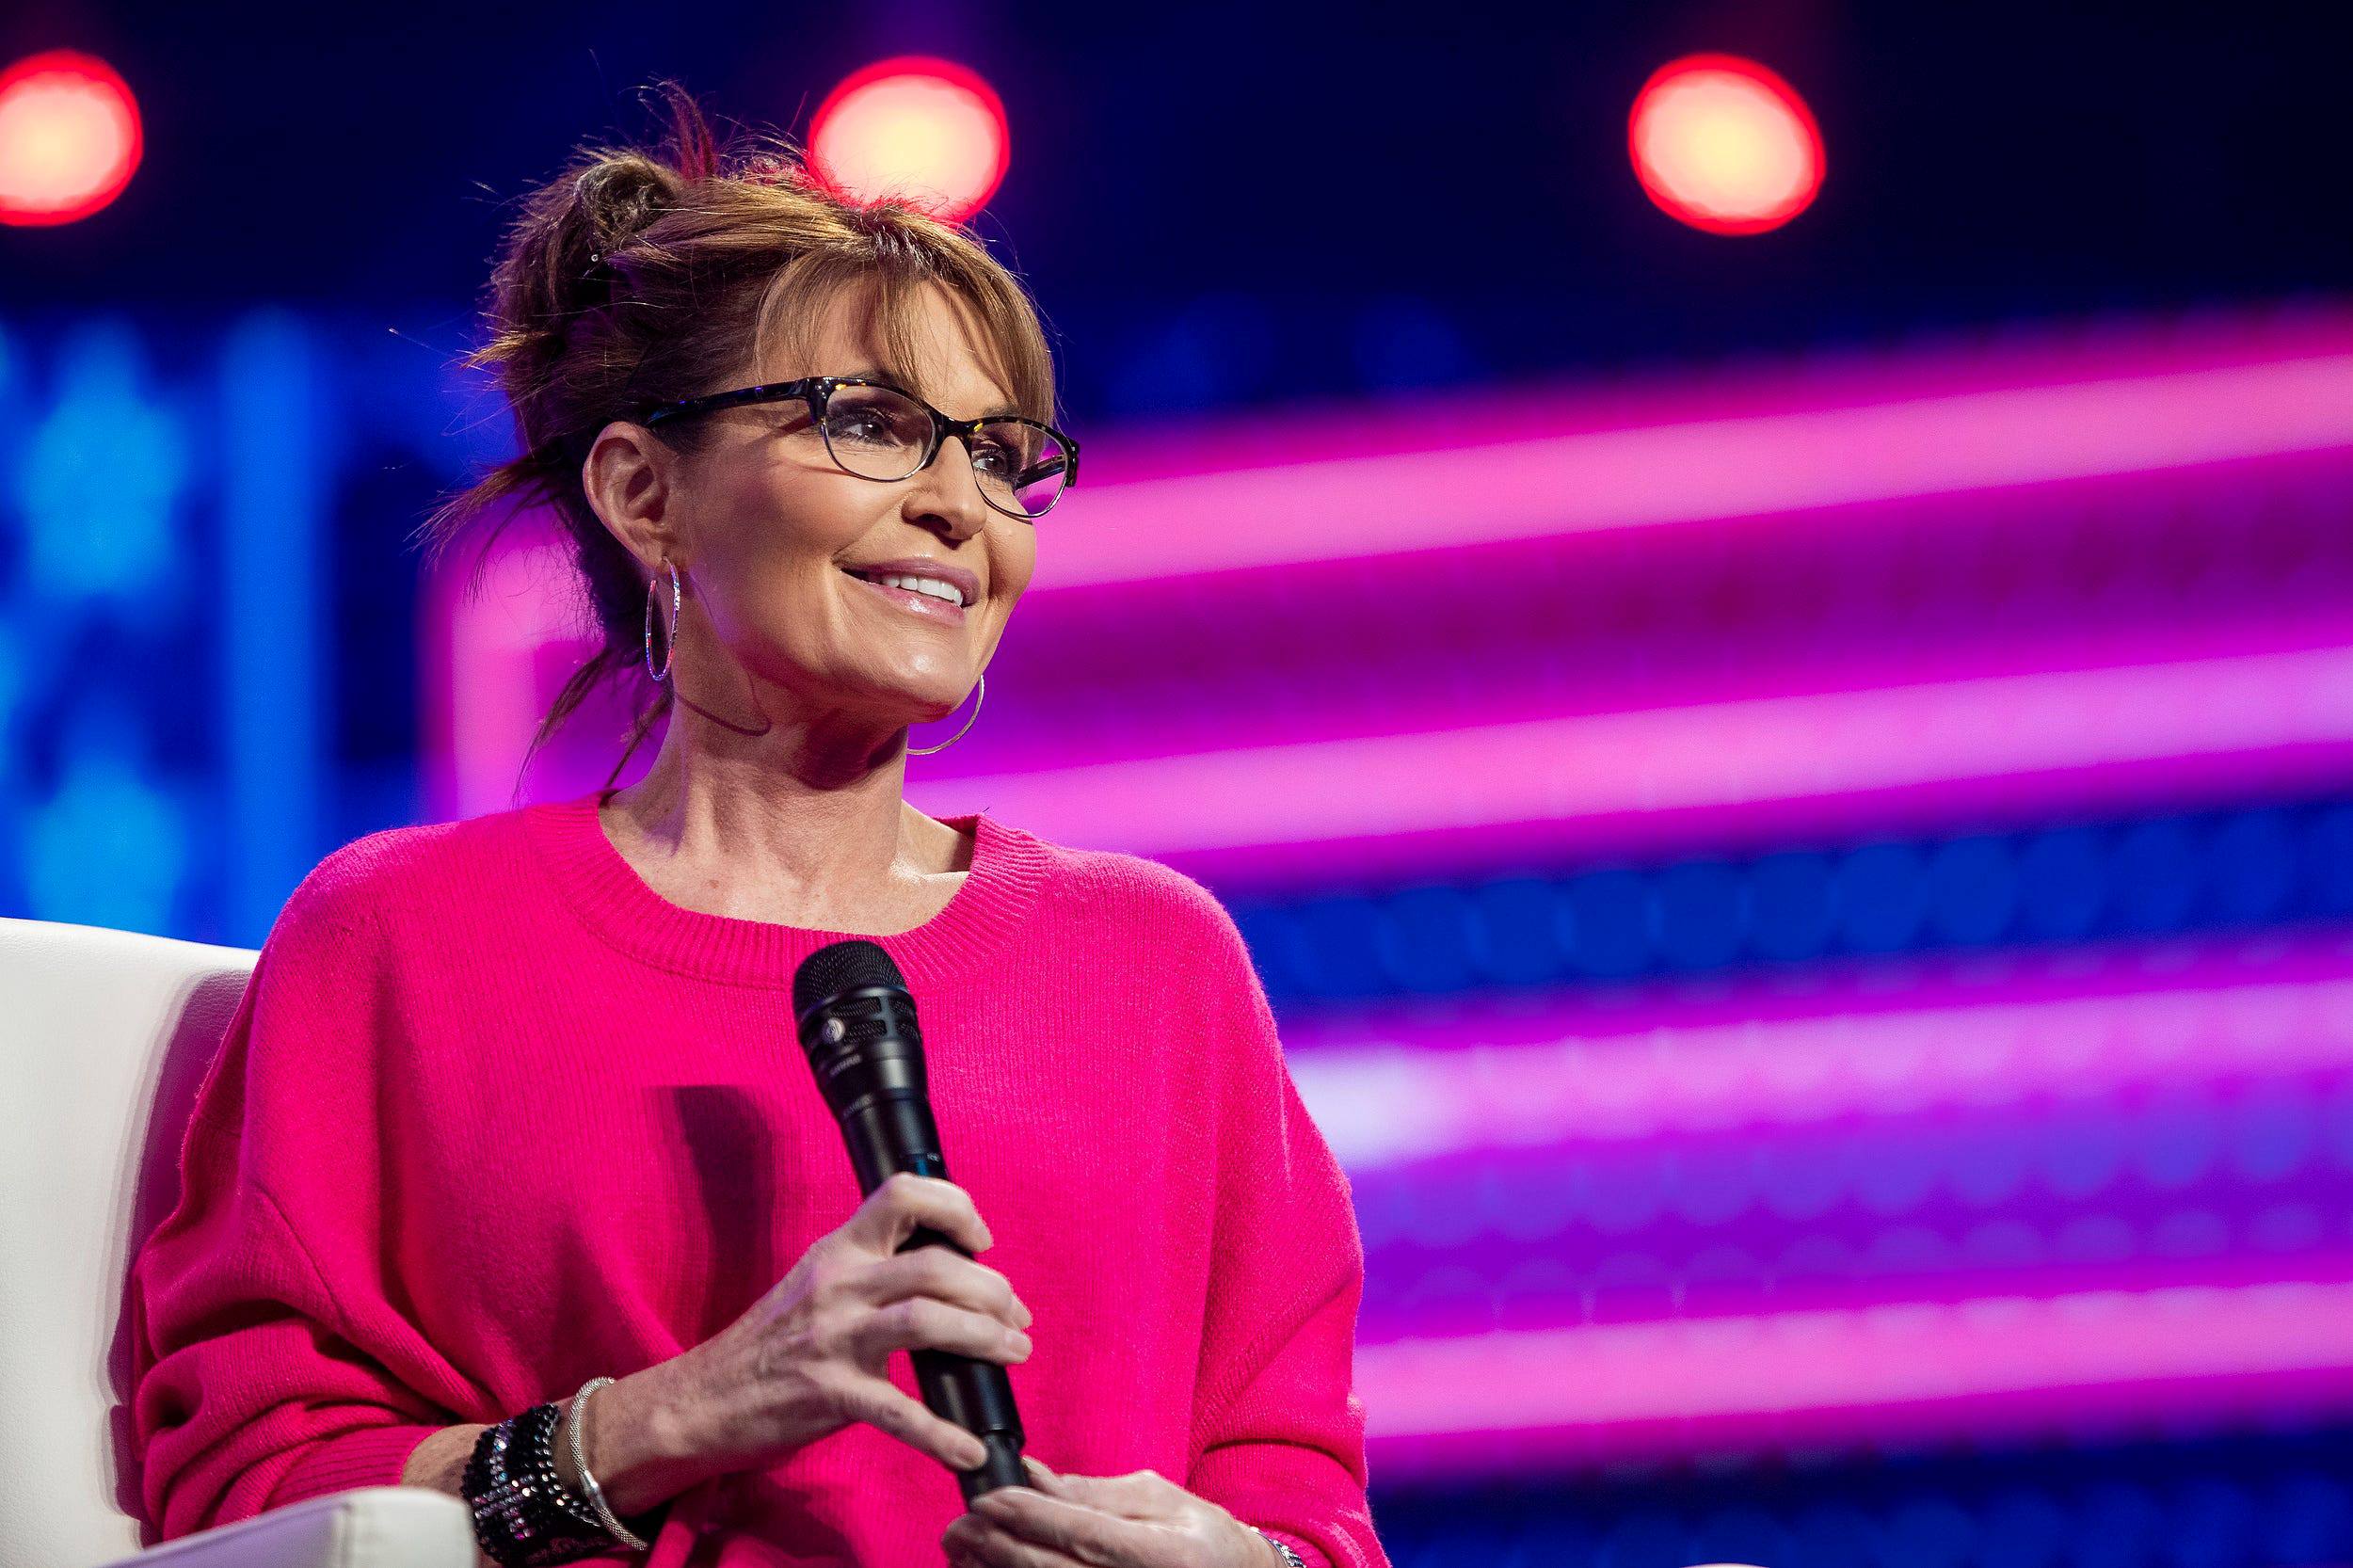 13 Facts About Sarah Palin - Facts.net